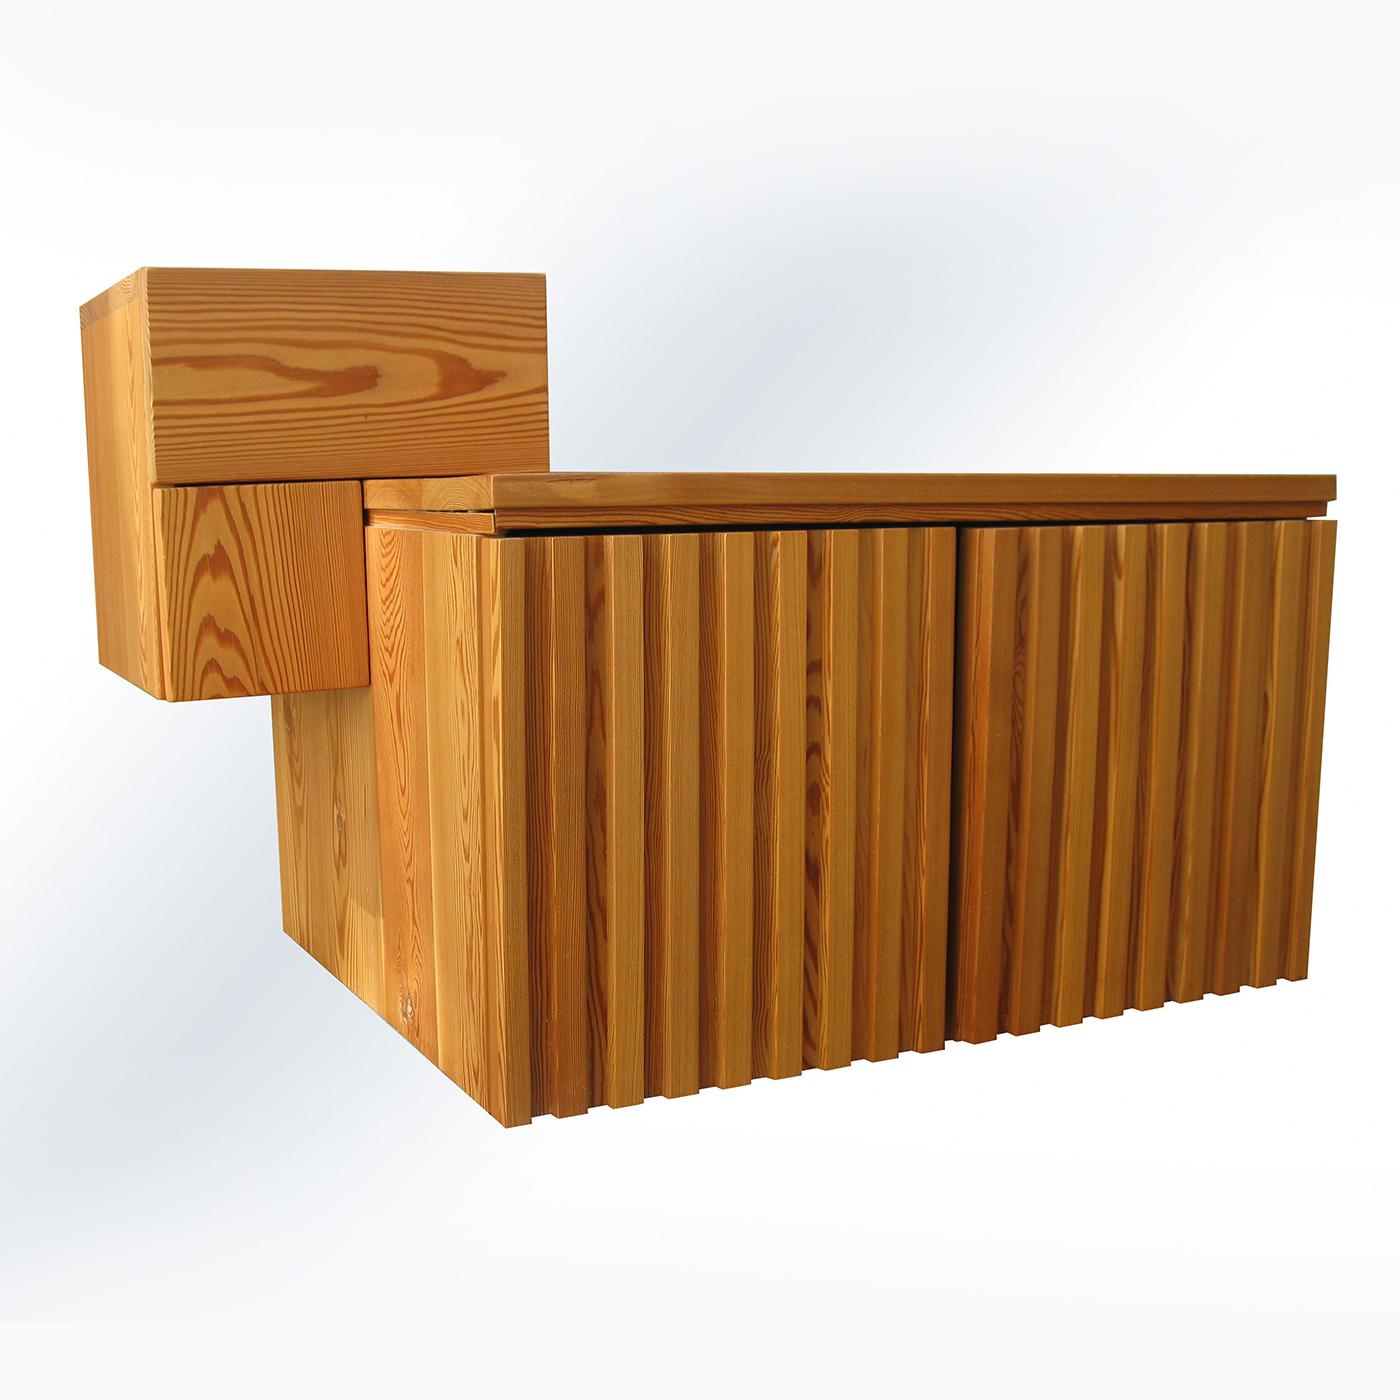 The Fuga credenza is beautifully crafted from European larch. Boasting an elegant slatted design for a refreshing update on an otherwise simple design, this piece is equipped with two doors and two drawers. Exuding a modern elegance with a subtle